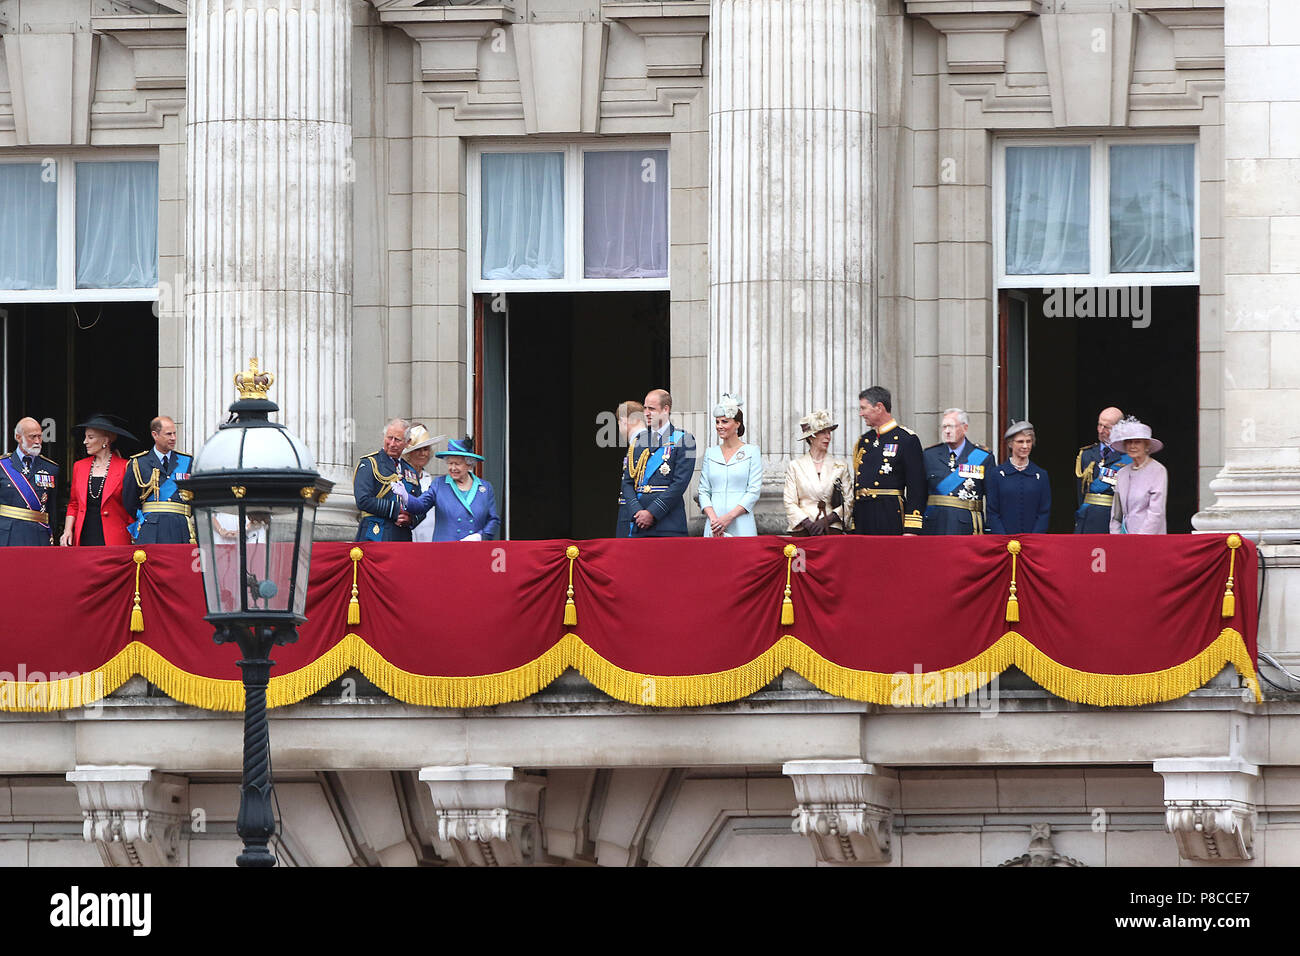 London, UK. 10th July, 2018. Royal Family, Prince Michael of Kent, Princess Michael of Kent, Prince Edward, Charles Prince of Wales, Camilla Duchess of Cornwall, Elizabeth II The Queen, Meghan Duchess of Sussex, Prince Harry Duke of Sussex, Prince William Duke of Cambridge, Catherine Duchess of Cambridge, Anne Princess Royal, Vice Admiral Sir Timothy Laurence, Prince Richard Duke of Gloucester, Birgitte Duchess of Gloucester, Prince Edward Duke of Kent, Katharine Duchess of Kent, RAF100 Parade and Flypast, The Mall & Buckingham Palace, London, UK. Credit: Rich Gold/Alamy Live News Stock Photo